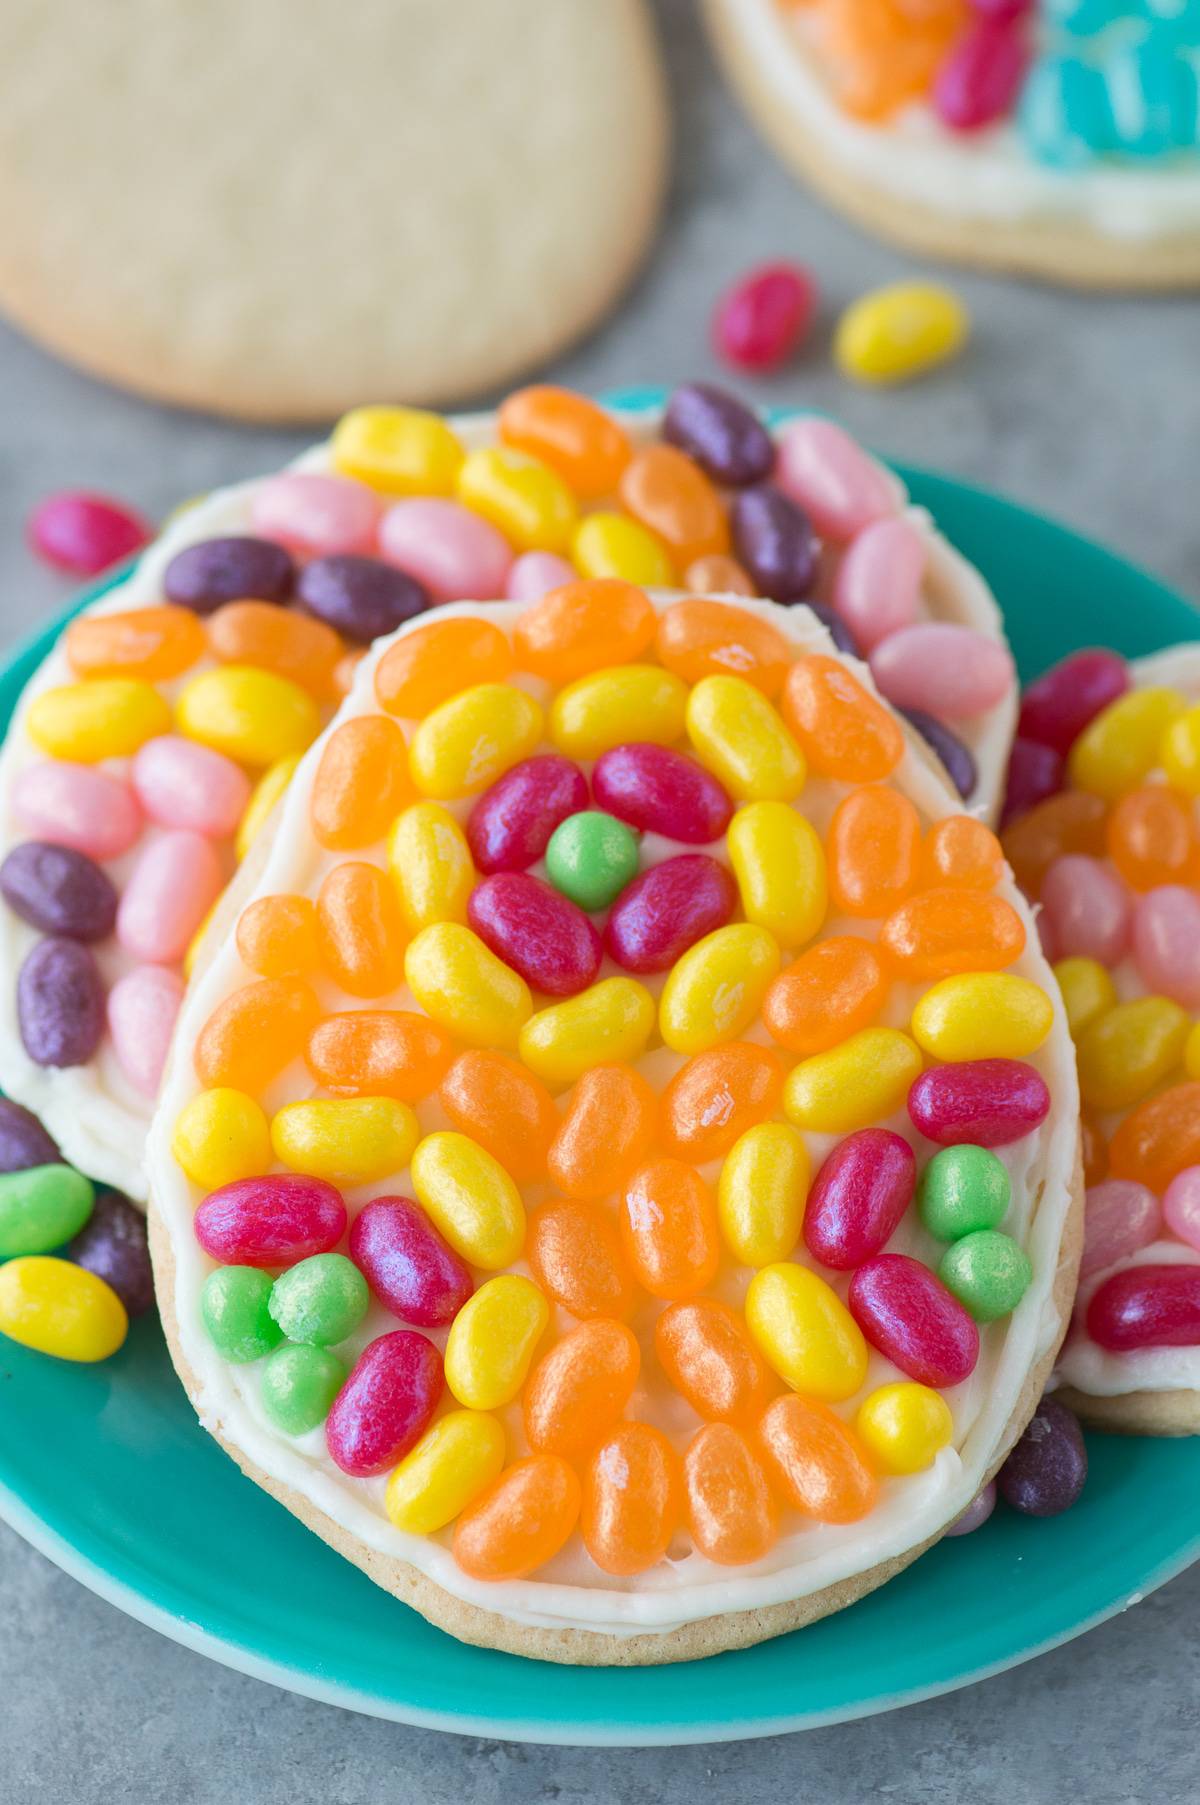 Jelly Belly Easter Egg Cookies | The First Year